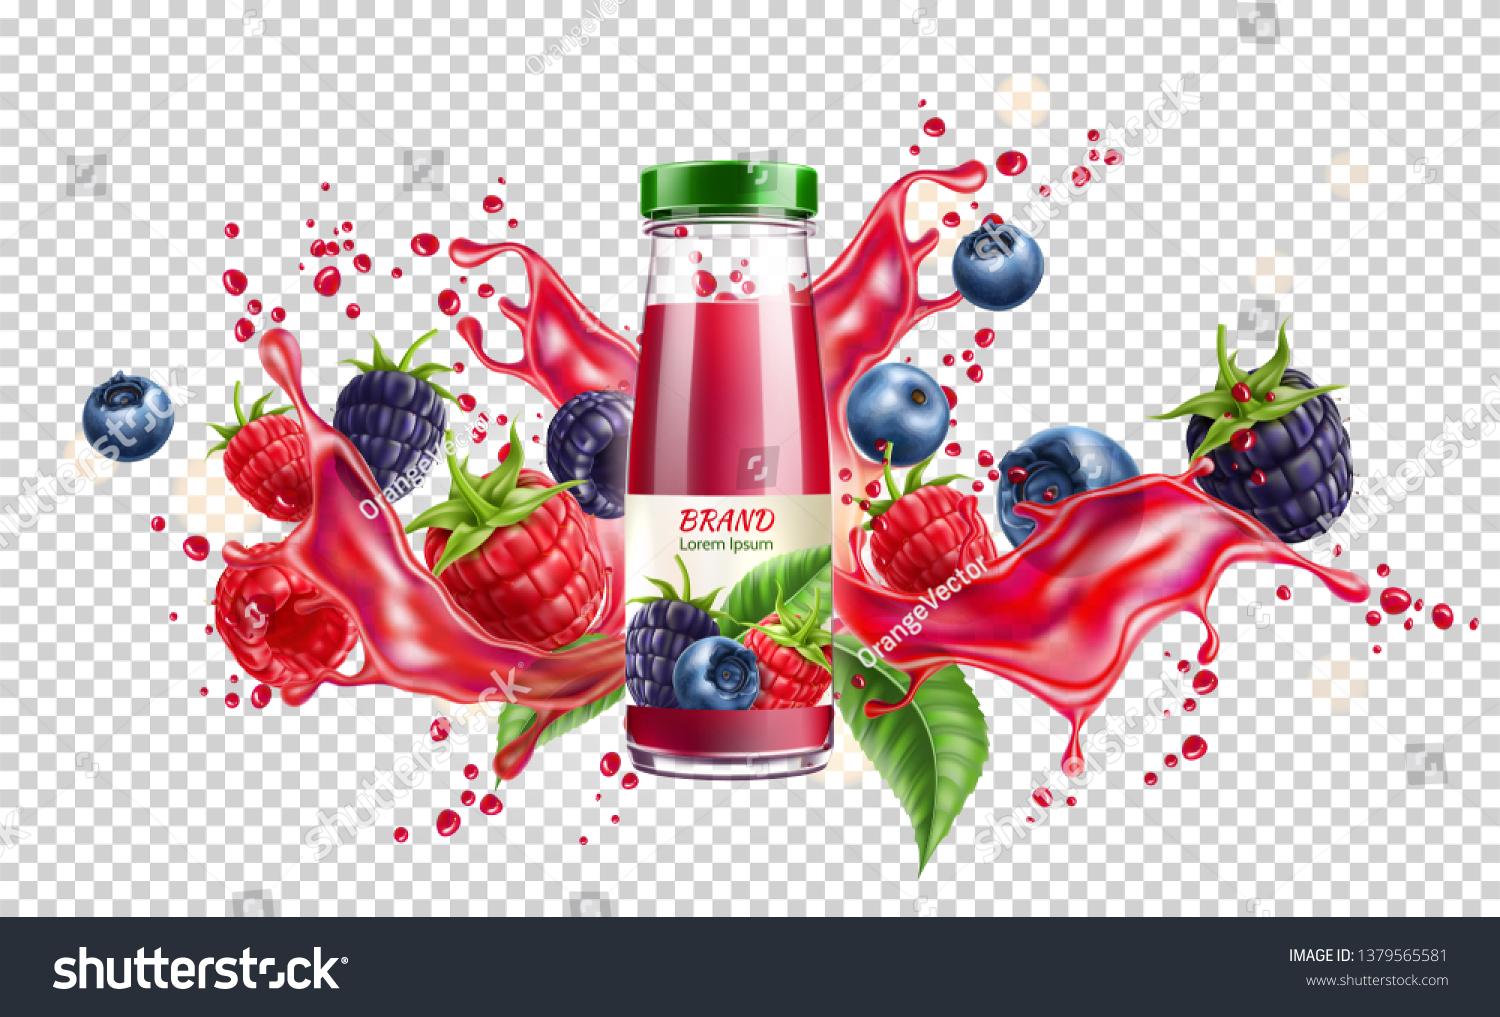 Realistic forest berries juice advertising design with blackberry, blueberry and raspberry in juicy splashing liquid. Forest mix splash for natural healthy product package design. Vector illustration #1379565581